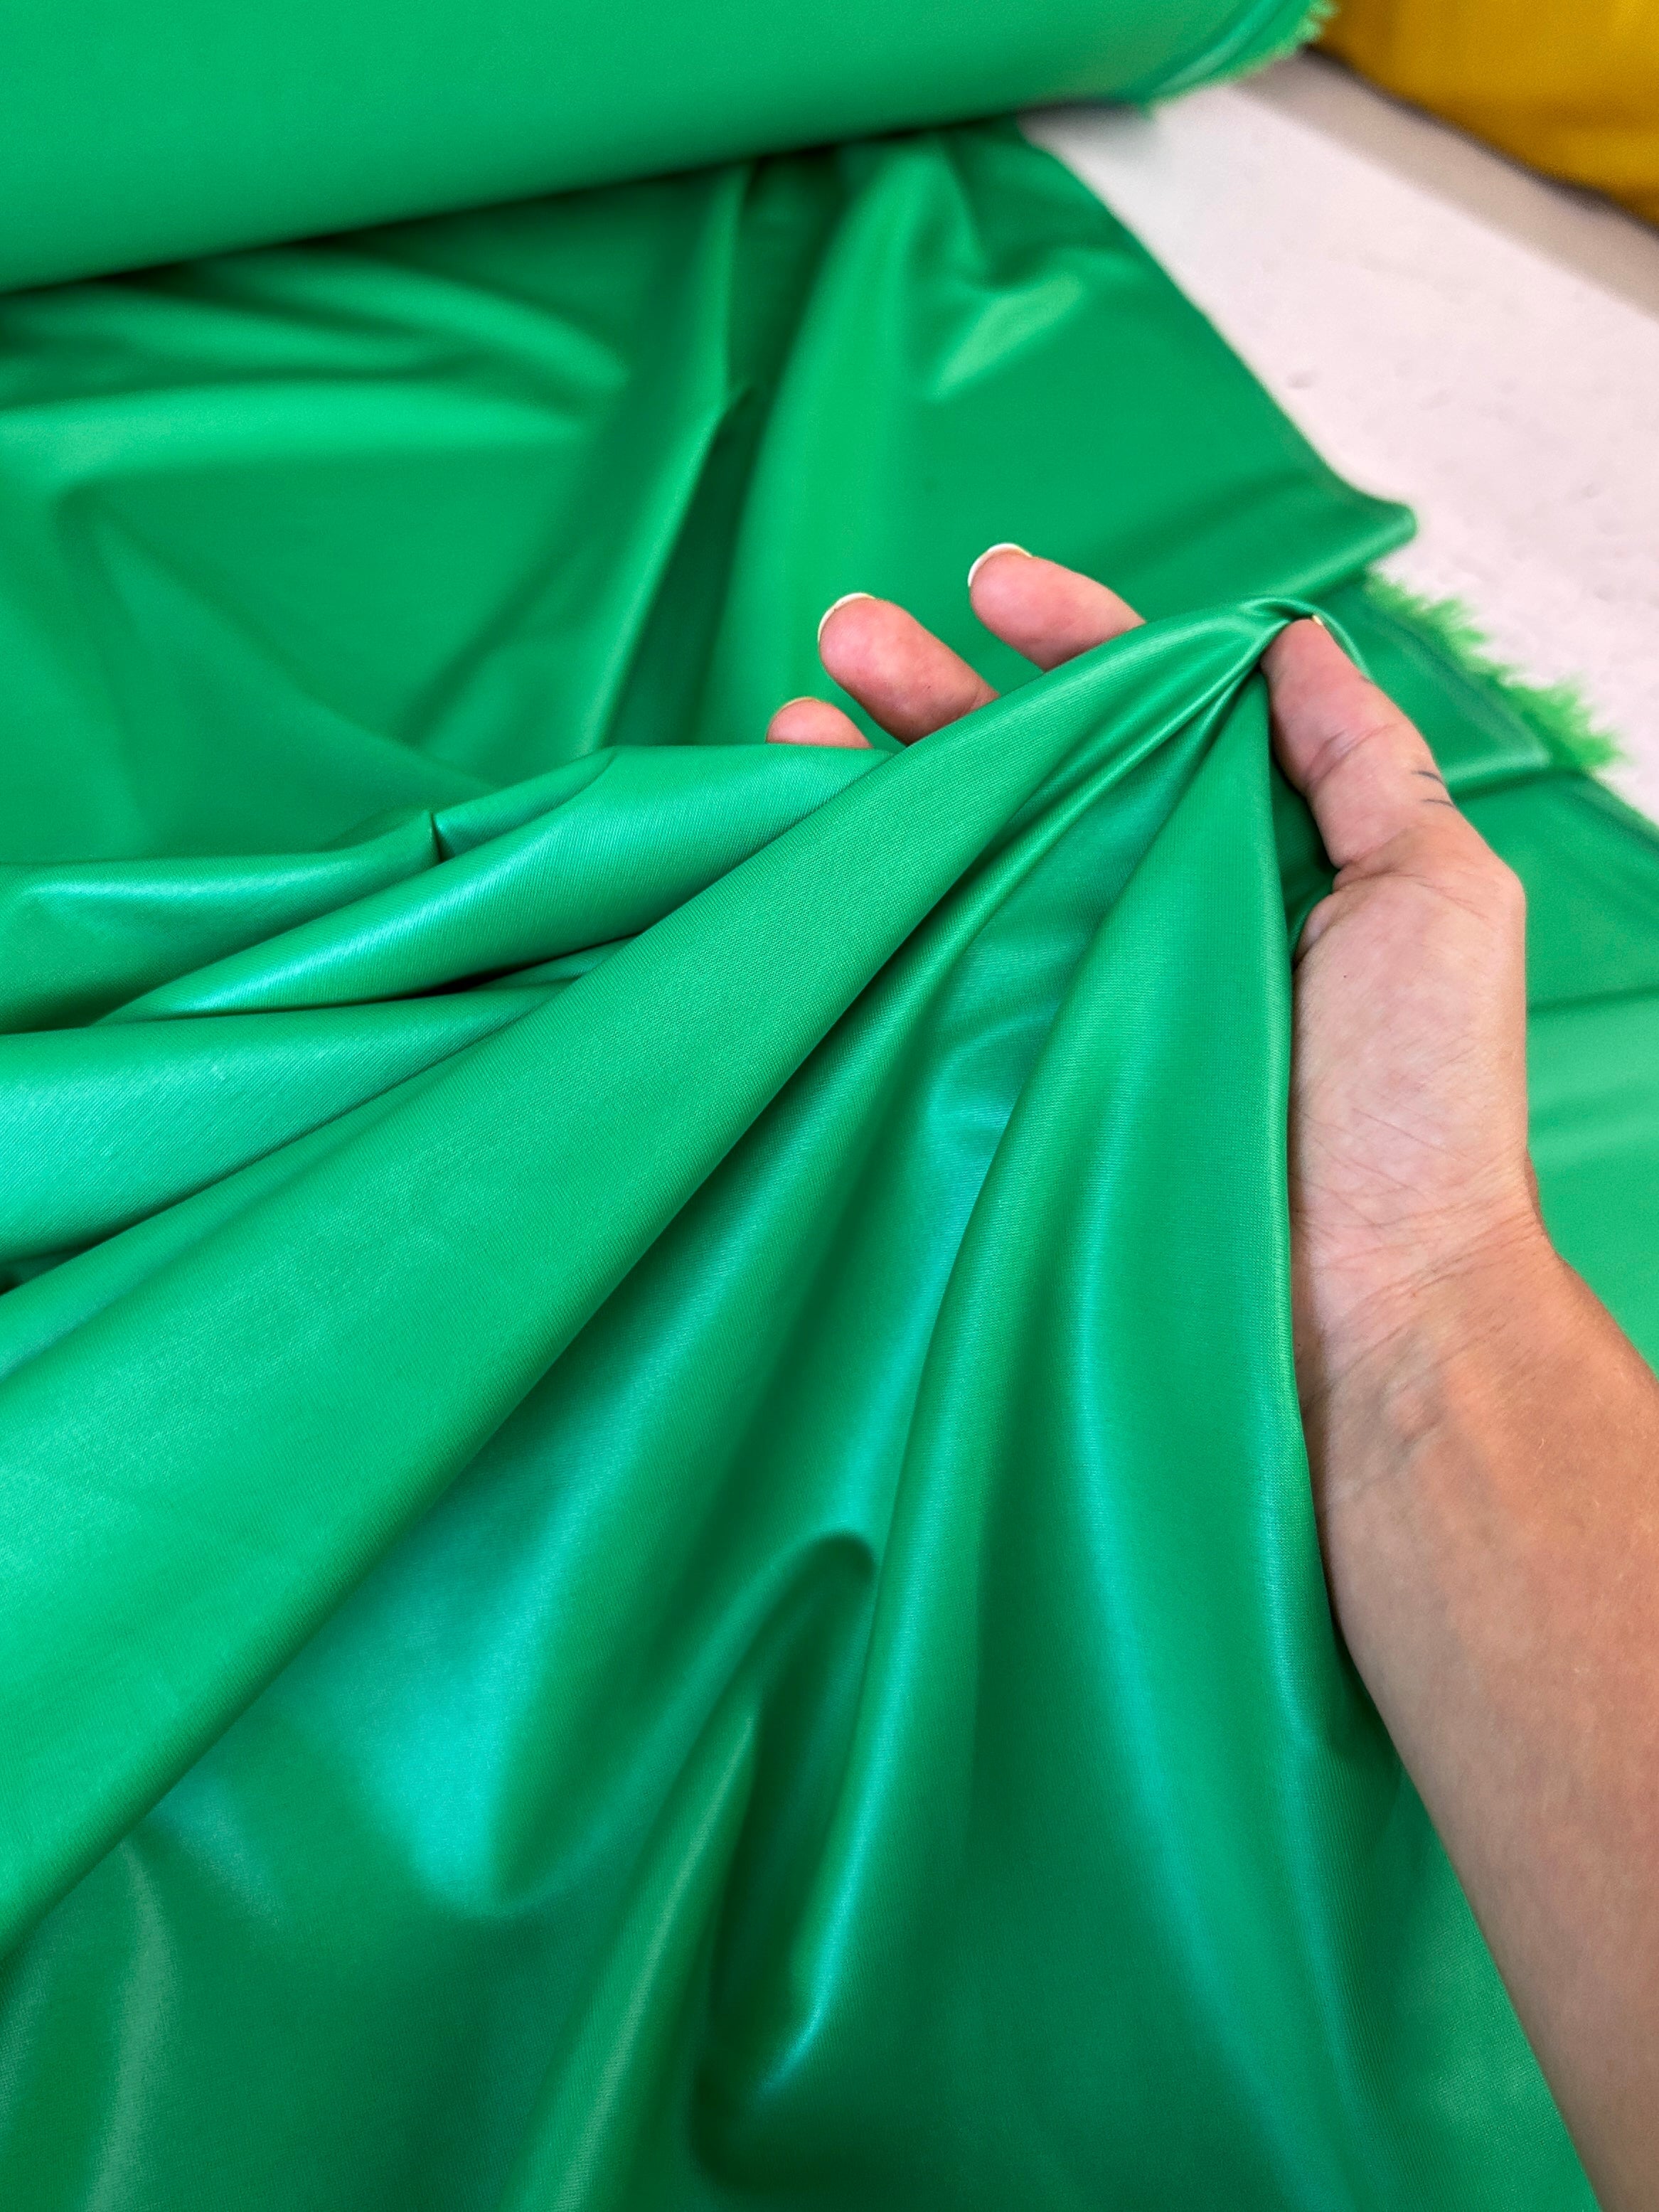 kelly green all way Stretch Faux Leather, green all way stretch leather, shiny faux leather, light green all way stretch faux leather for woman, faux leather for costumes, faux leather for home decor, 2 way stretch faux leather, leather for blazers, cheap leather, discounted leather, leather on sale